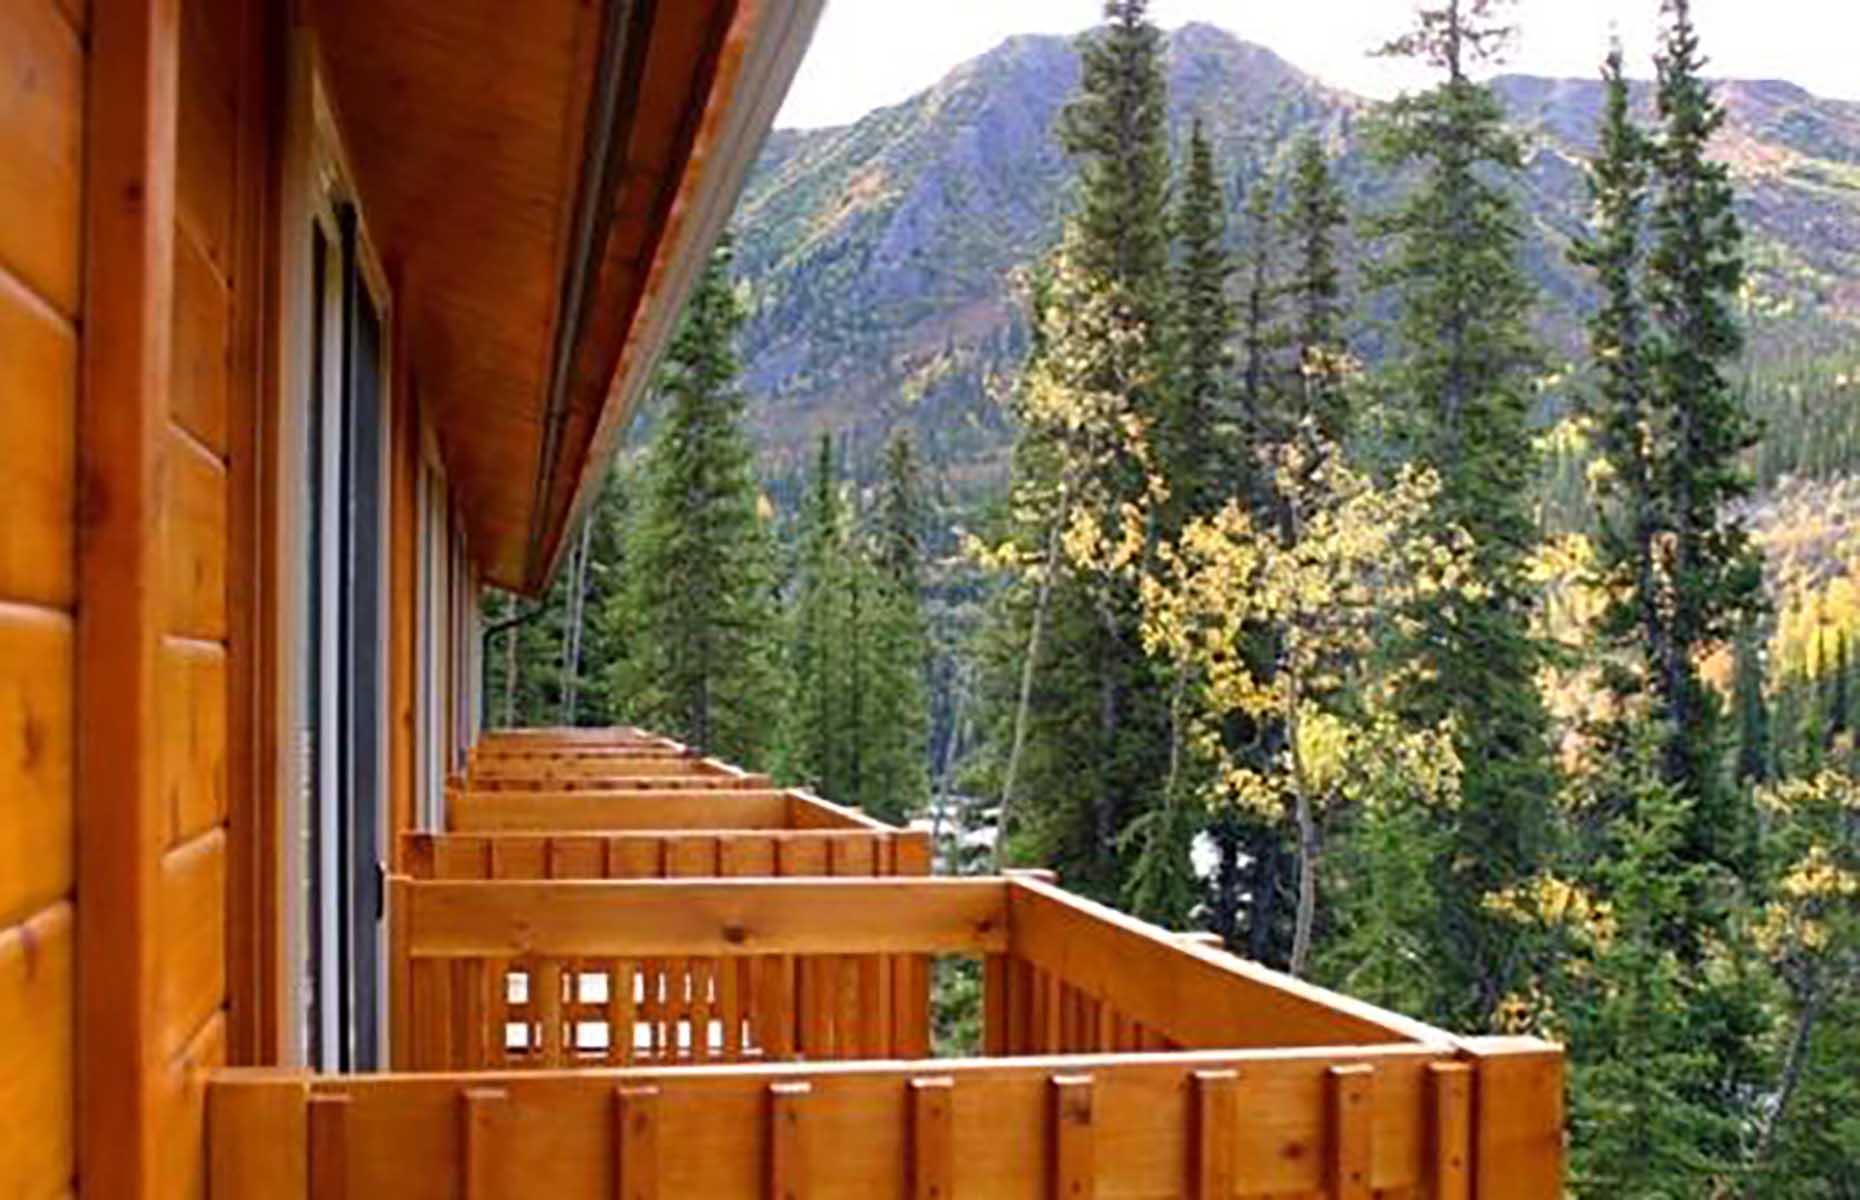 <p>You'll experience some of Alaska's most epic landscapes here, as this family-run property sits right on the boundary of Denali National Park. Expect rustic comfort, with lots of wood and simple but cozy rooms offering killer views of the surrounding wilderness. You can dine at the laid-back food-truck court and fill up on supplies for your adventures at the general store.</p>